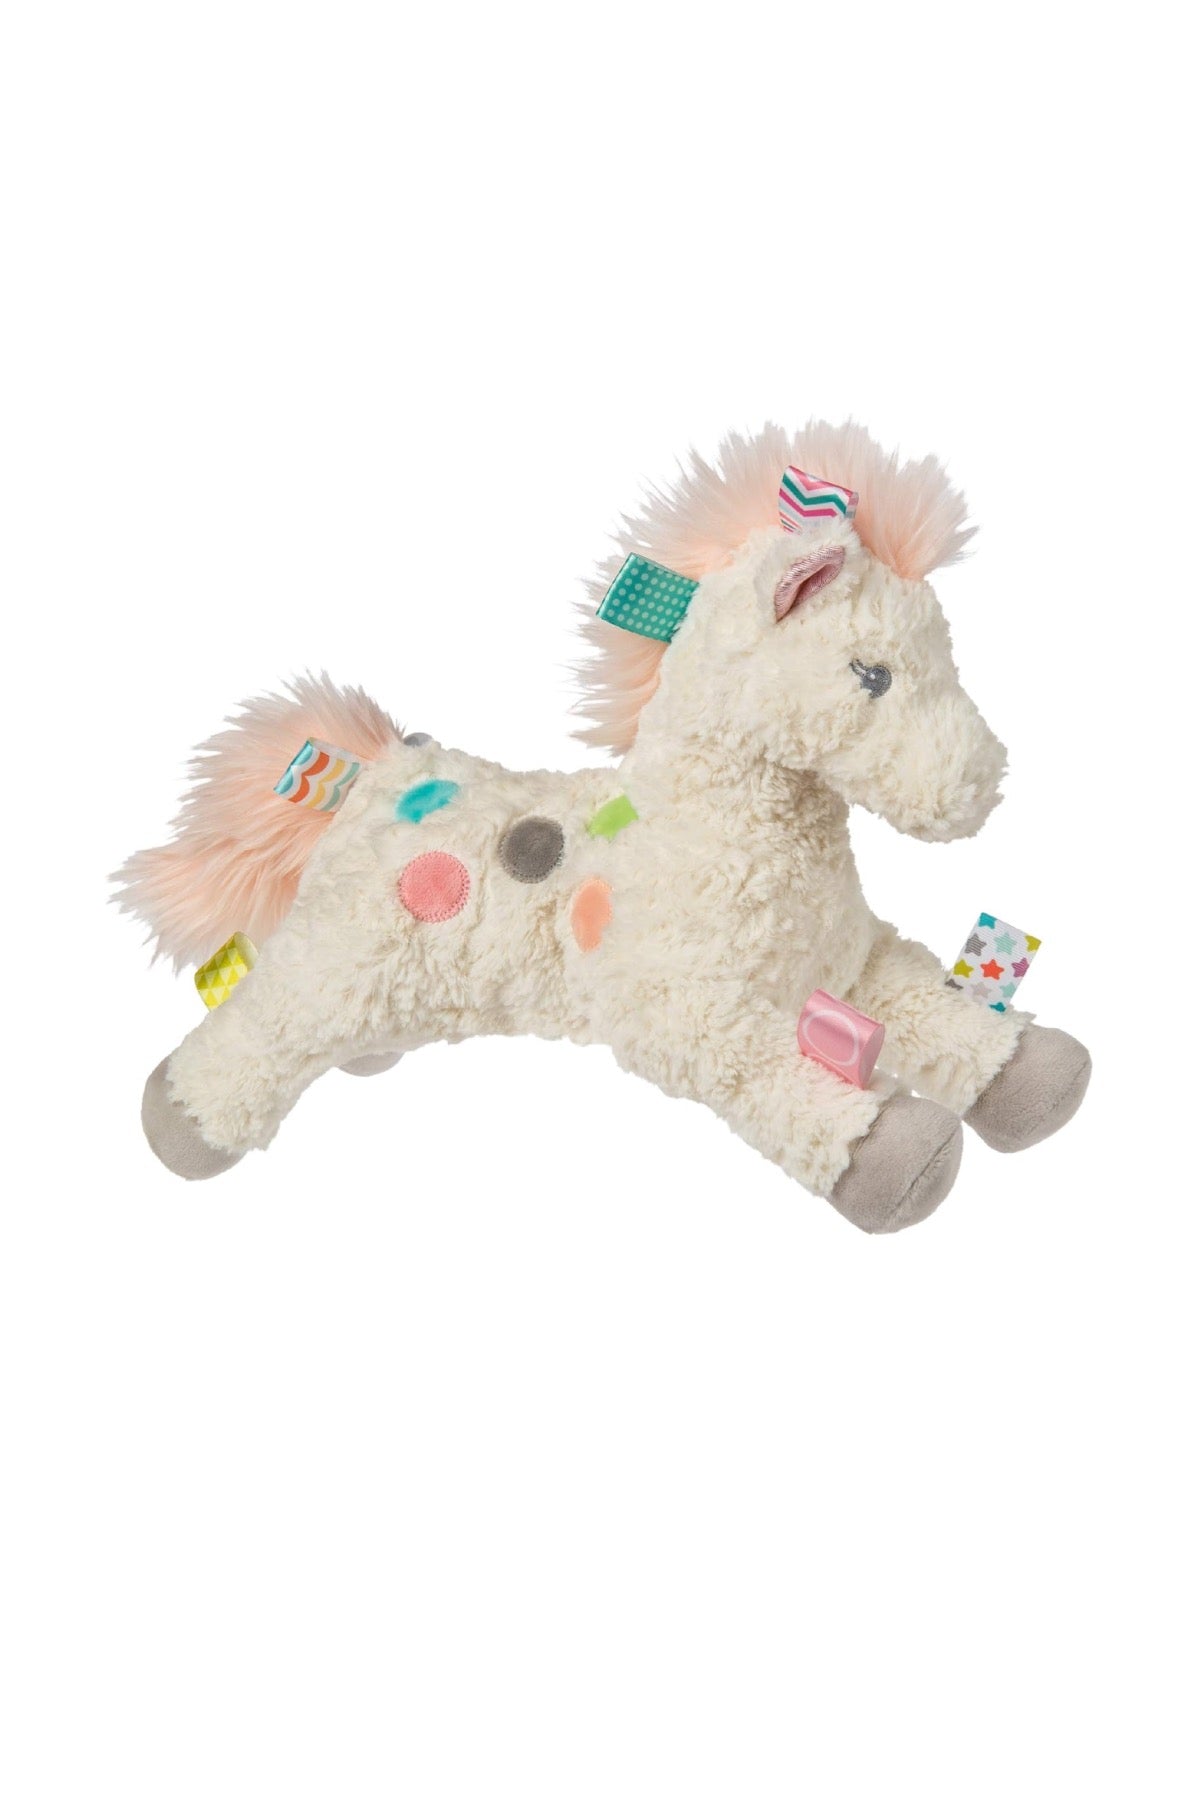 Taggies Me Painted Pony Toy Mary Meyer Corporation Plush